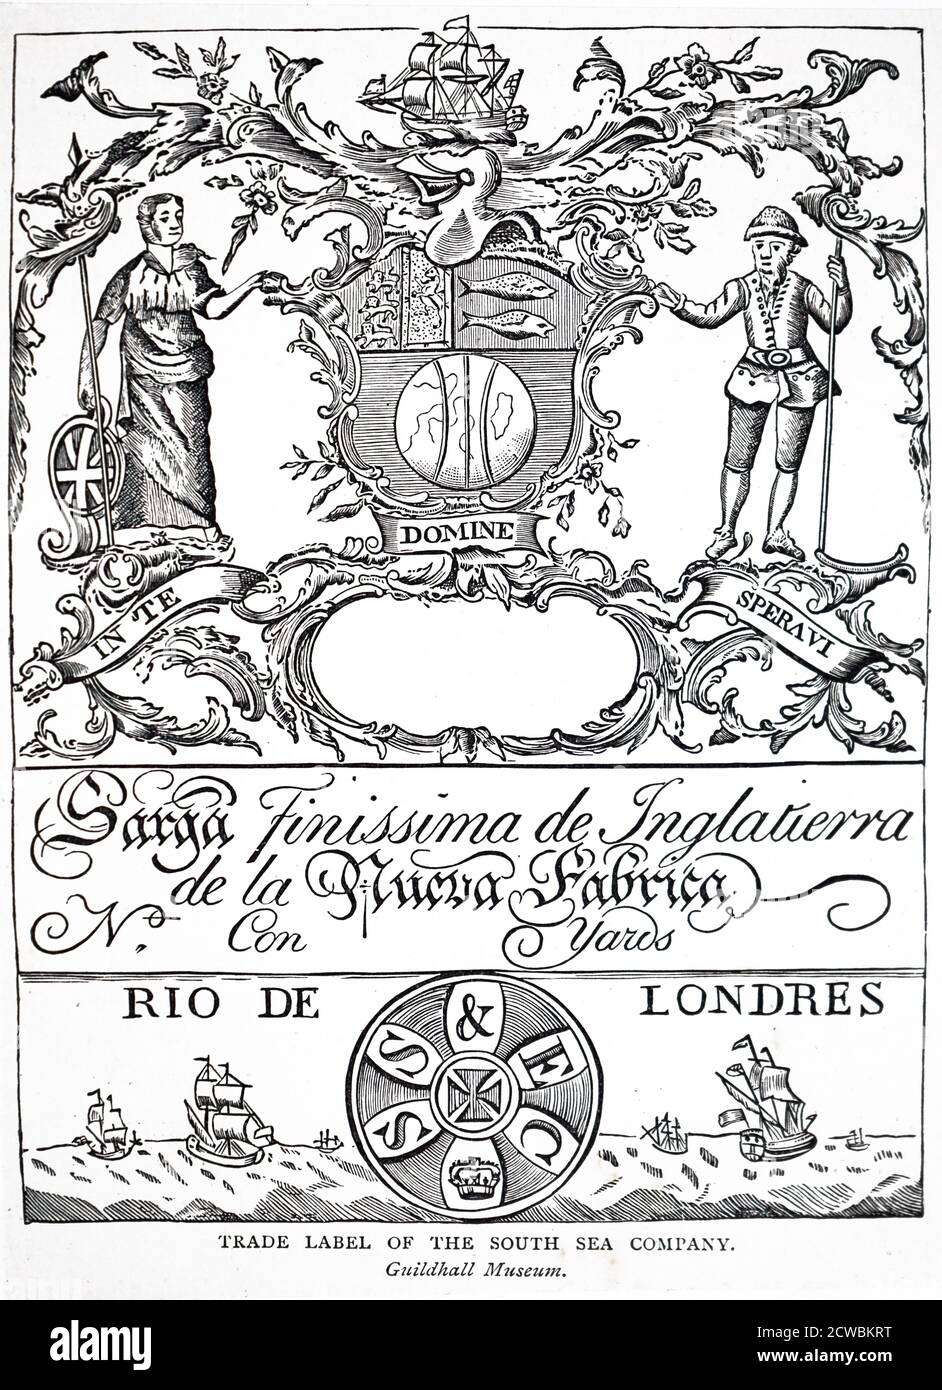 Woodcut engraving depicting a trade label of the South Sea Company. Stock Photo